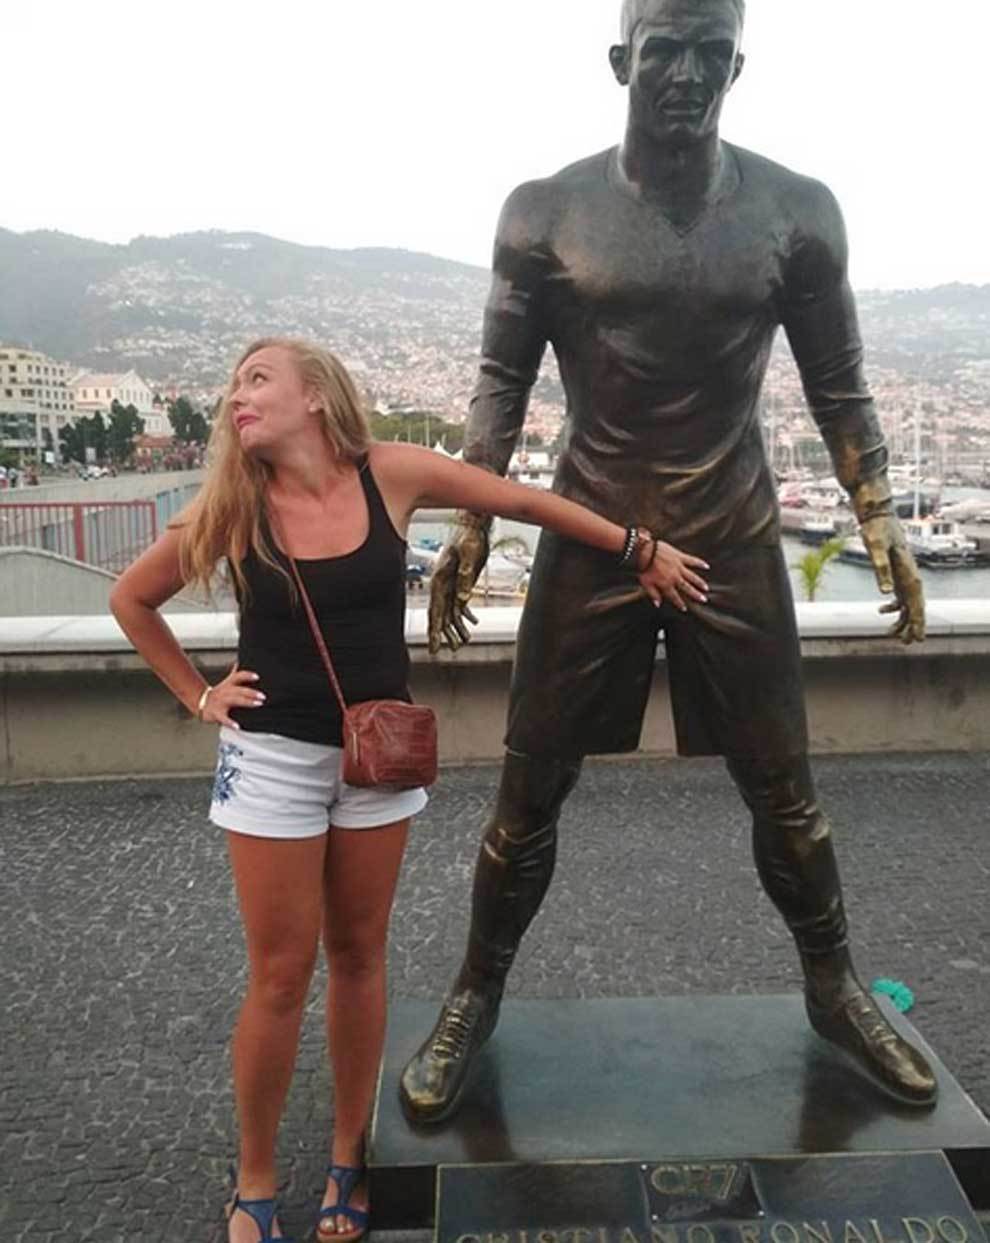 Serie A Juventus Tourists Rub And Touch The Genitals Of Cristiano Ronaldo S Statue The Statue In Madeira Of Cristiano Ronaldo Marca English